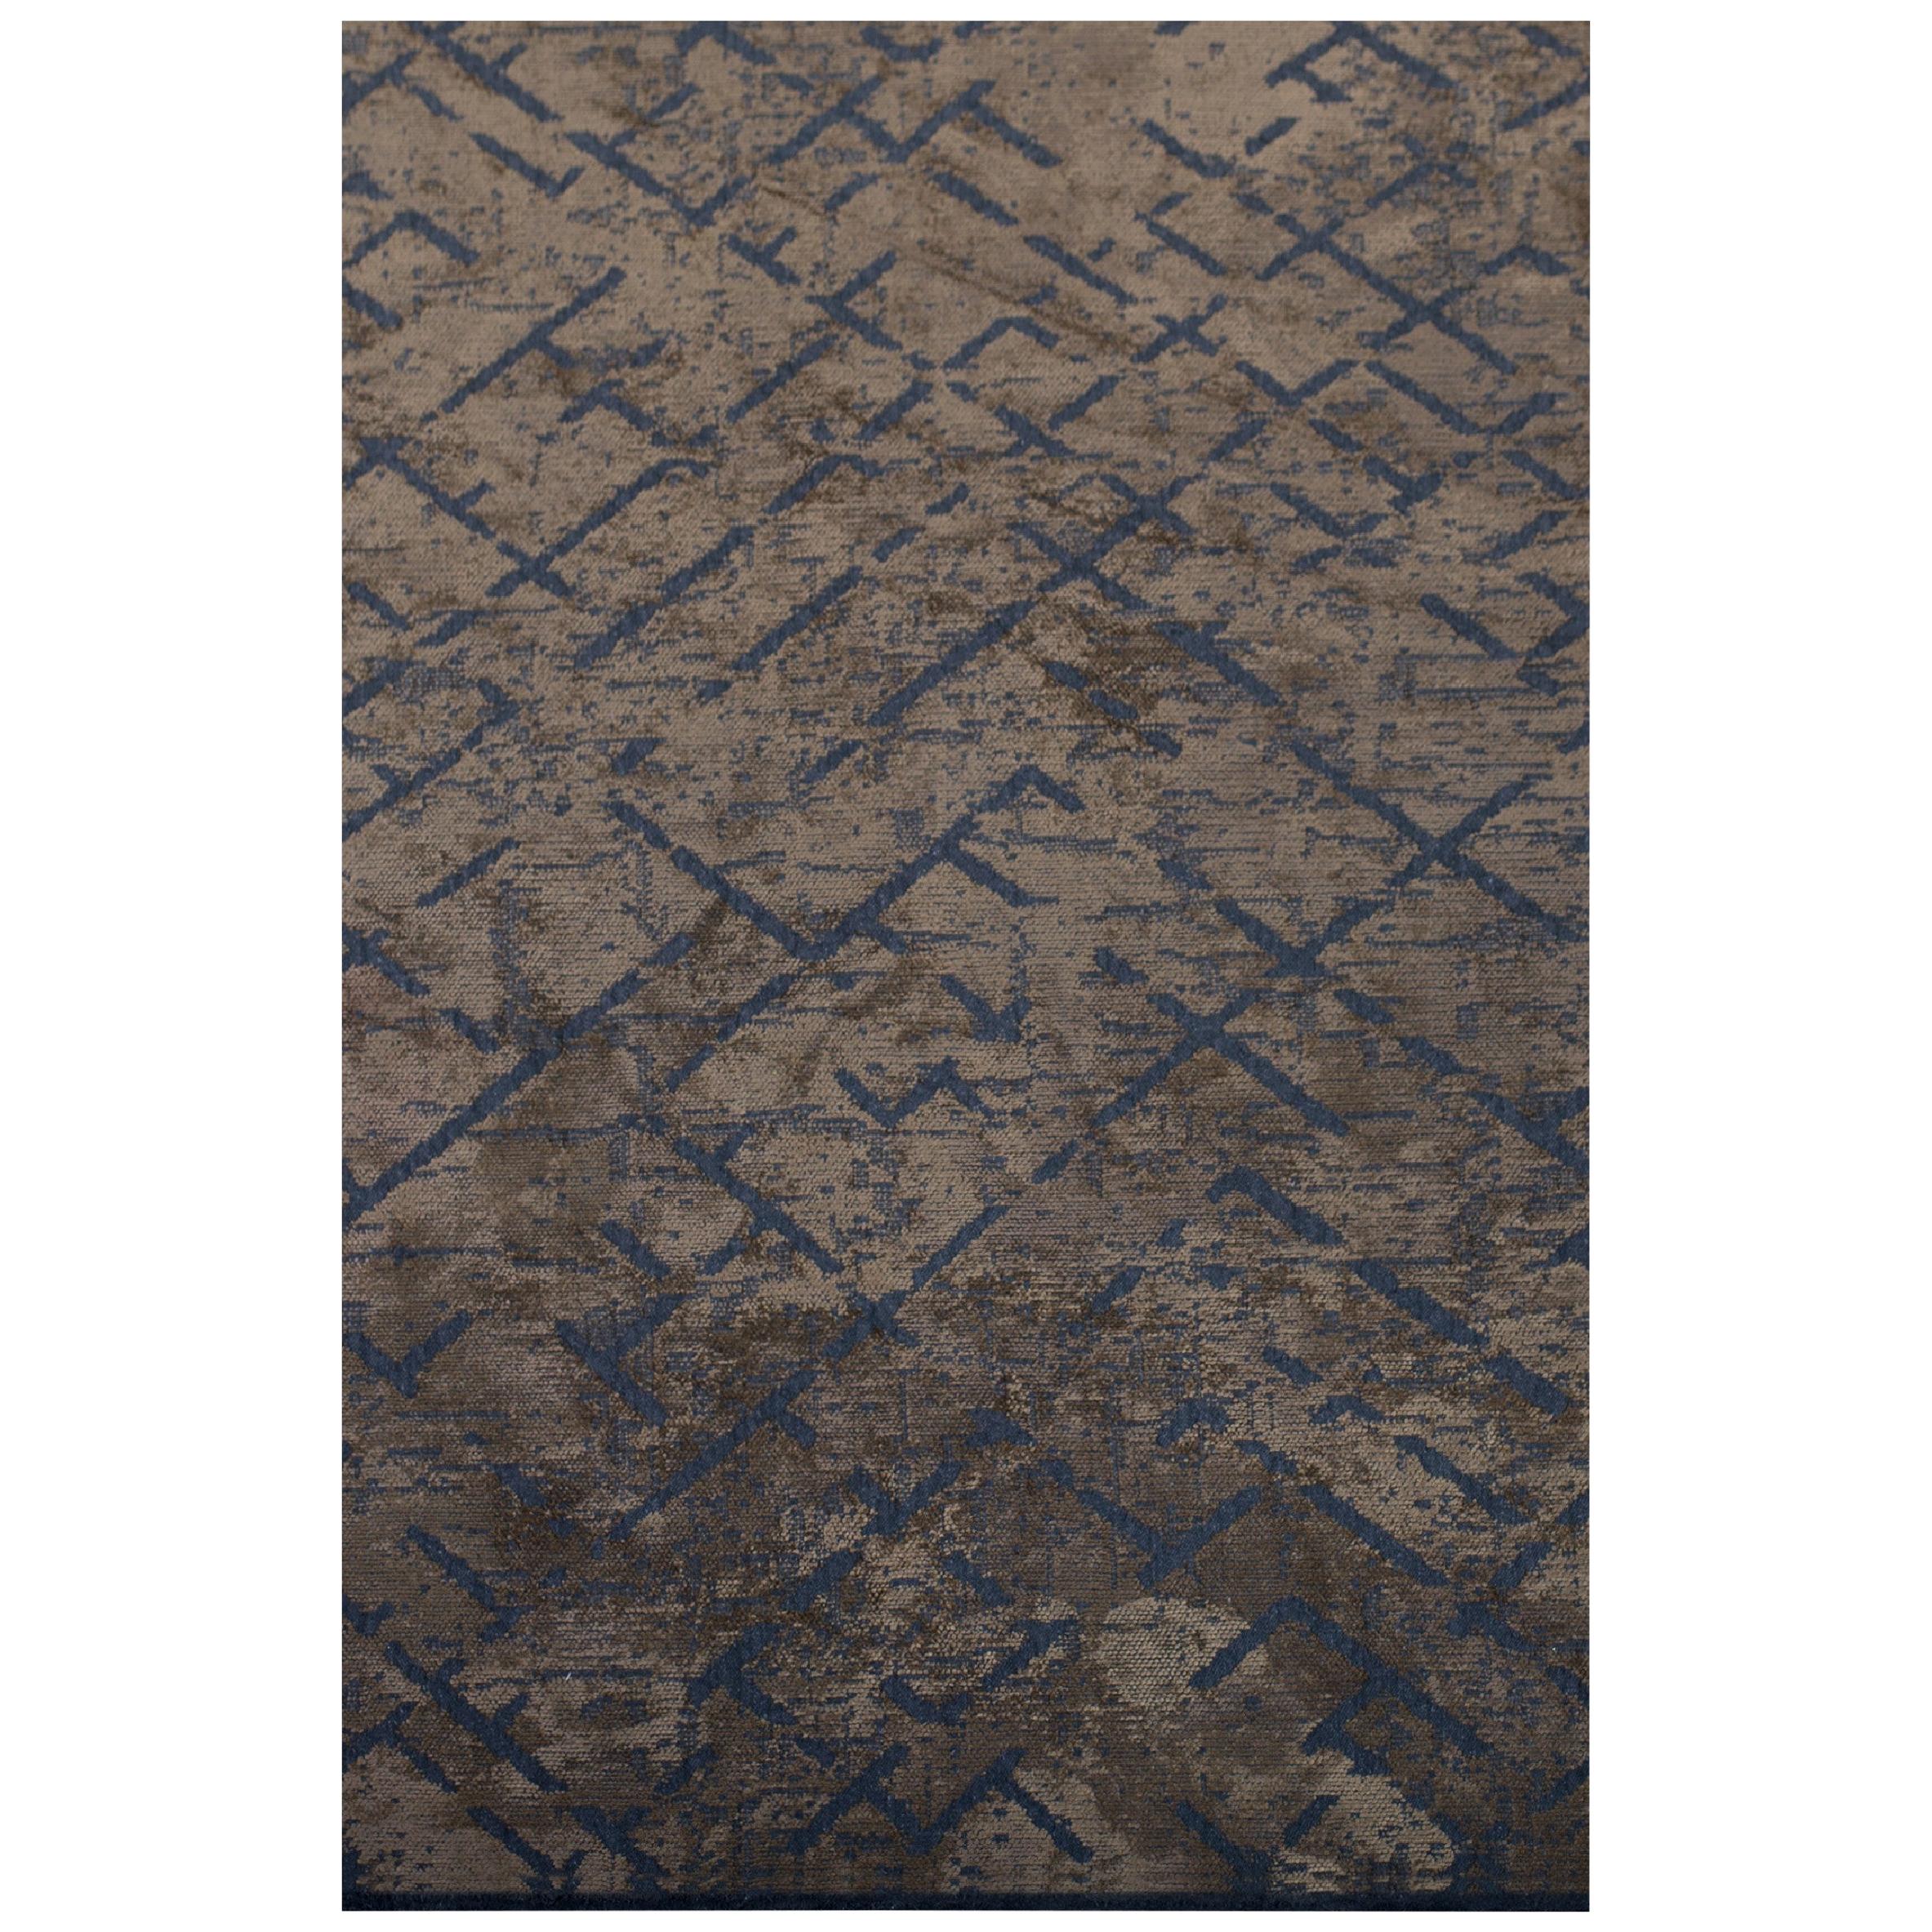 Mink Brown and Blue Contemporary Abstract Pattern Luxury Soft Semi-Plush Rug